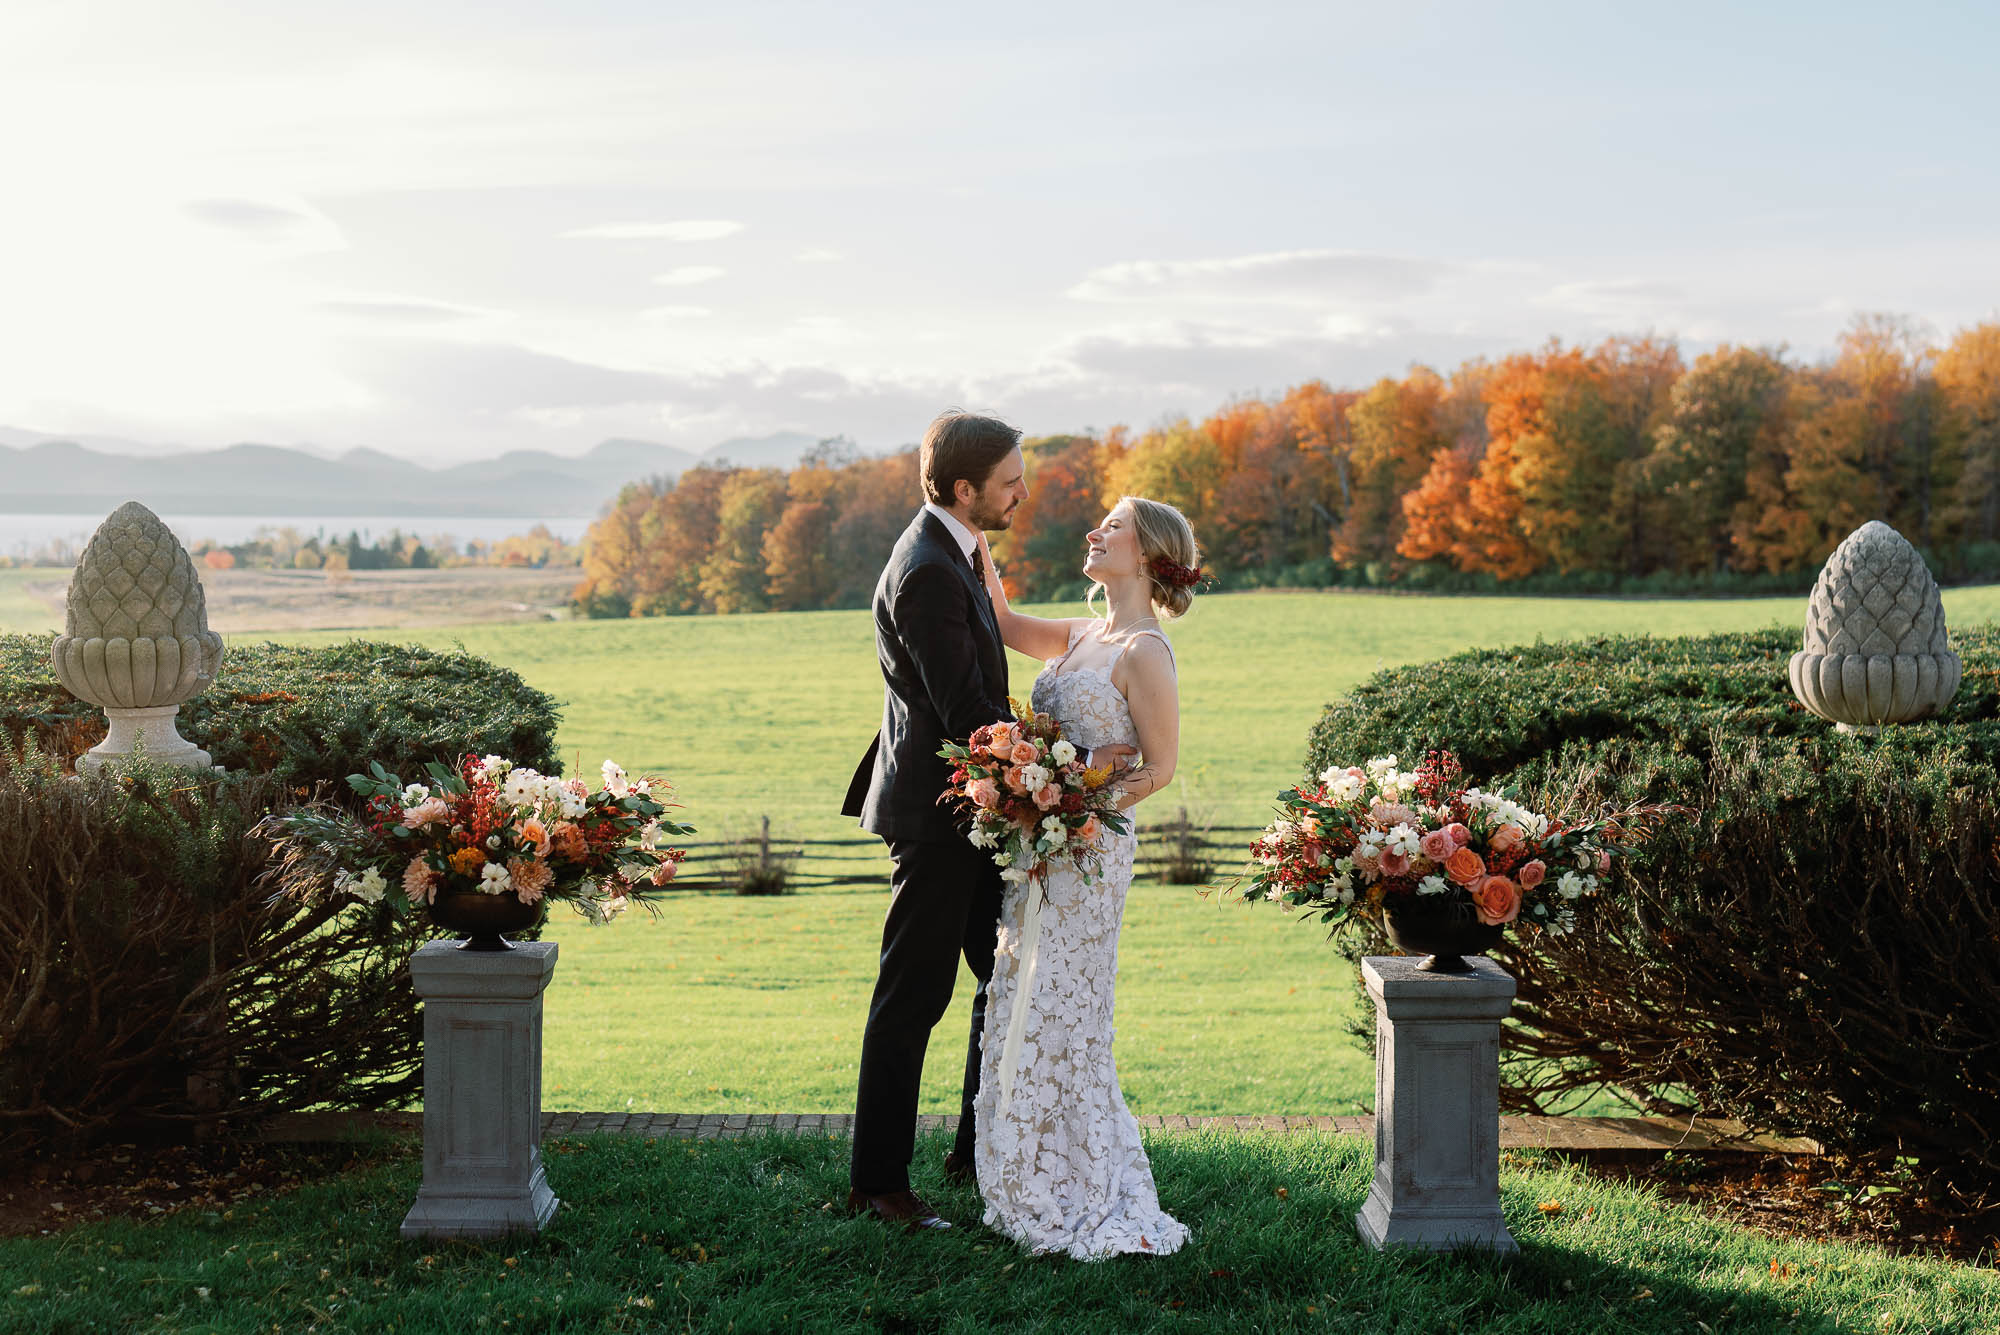 Bride and groom at wedding ceremony surrounded by fall leaves and flowers at the brick house at shelburne museum in vermont